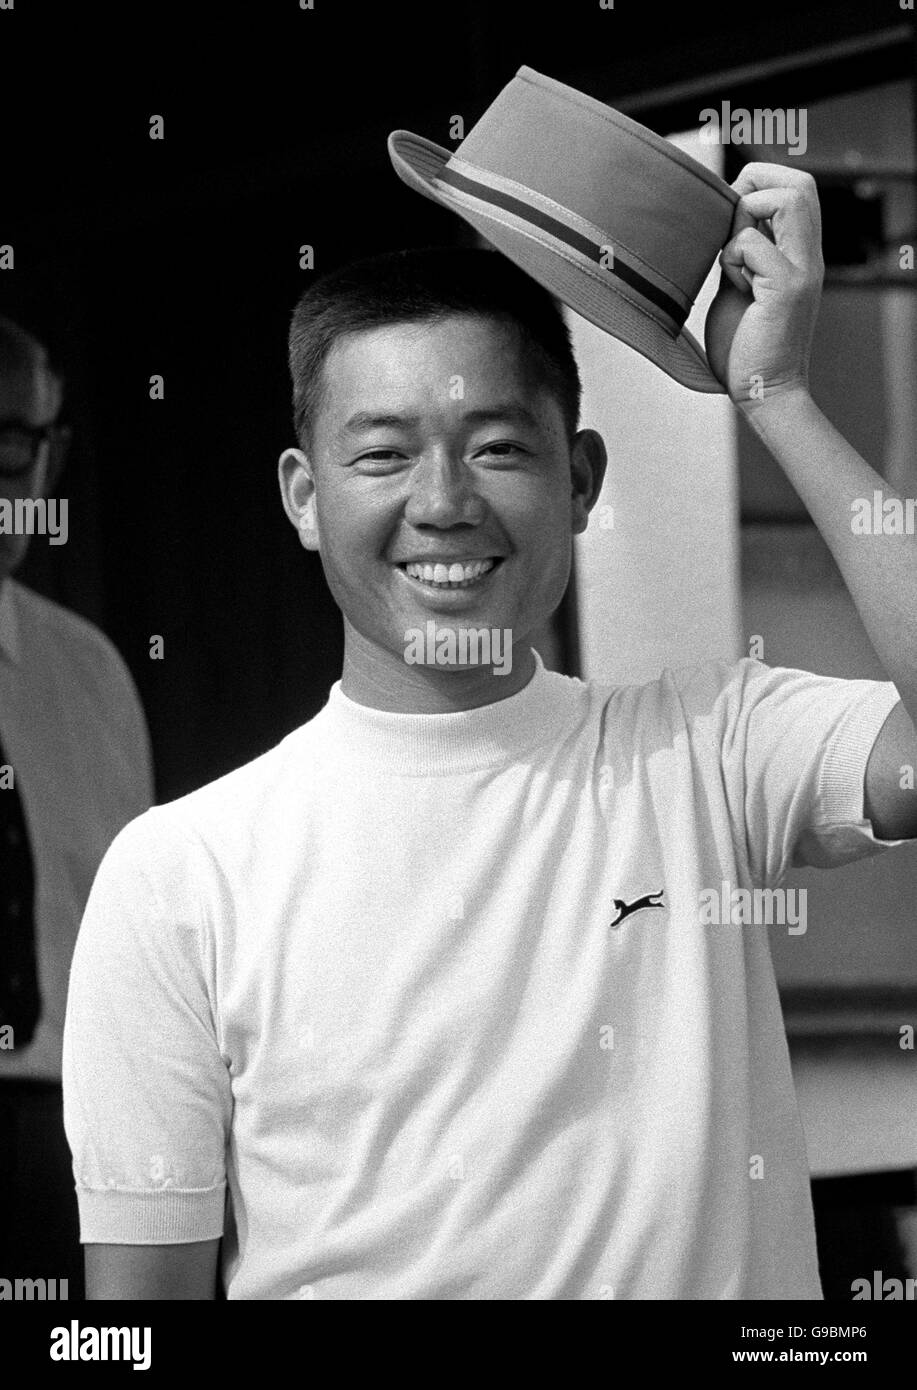 Golf - Open Golf Championship - Royal Birkdale. Liang Huan Lu looks pleased with his second round 70. Stock Photo